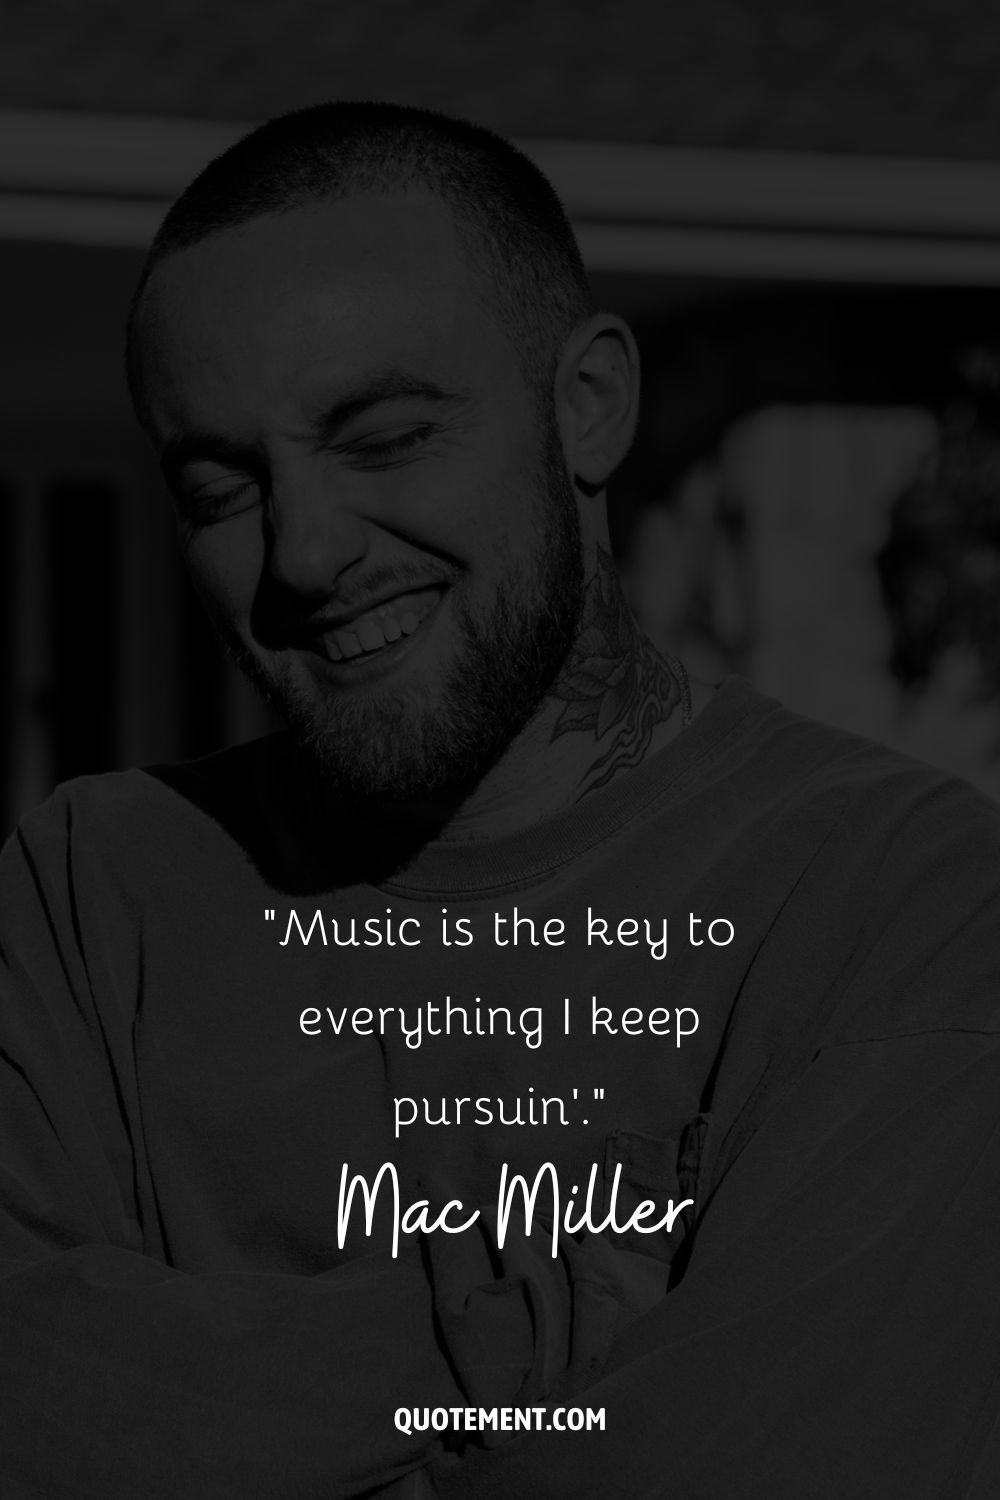 “Music is the key to everything I keep pursuin'.” – Mac Miller